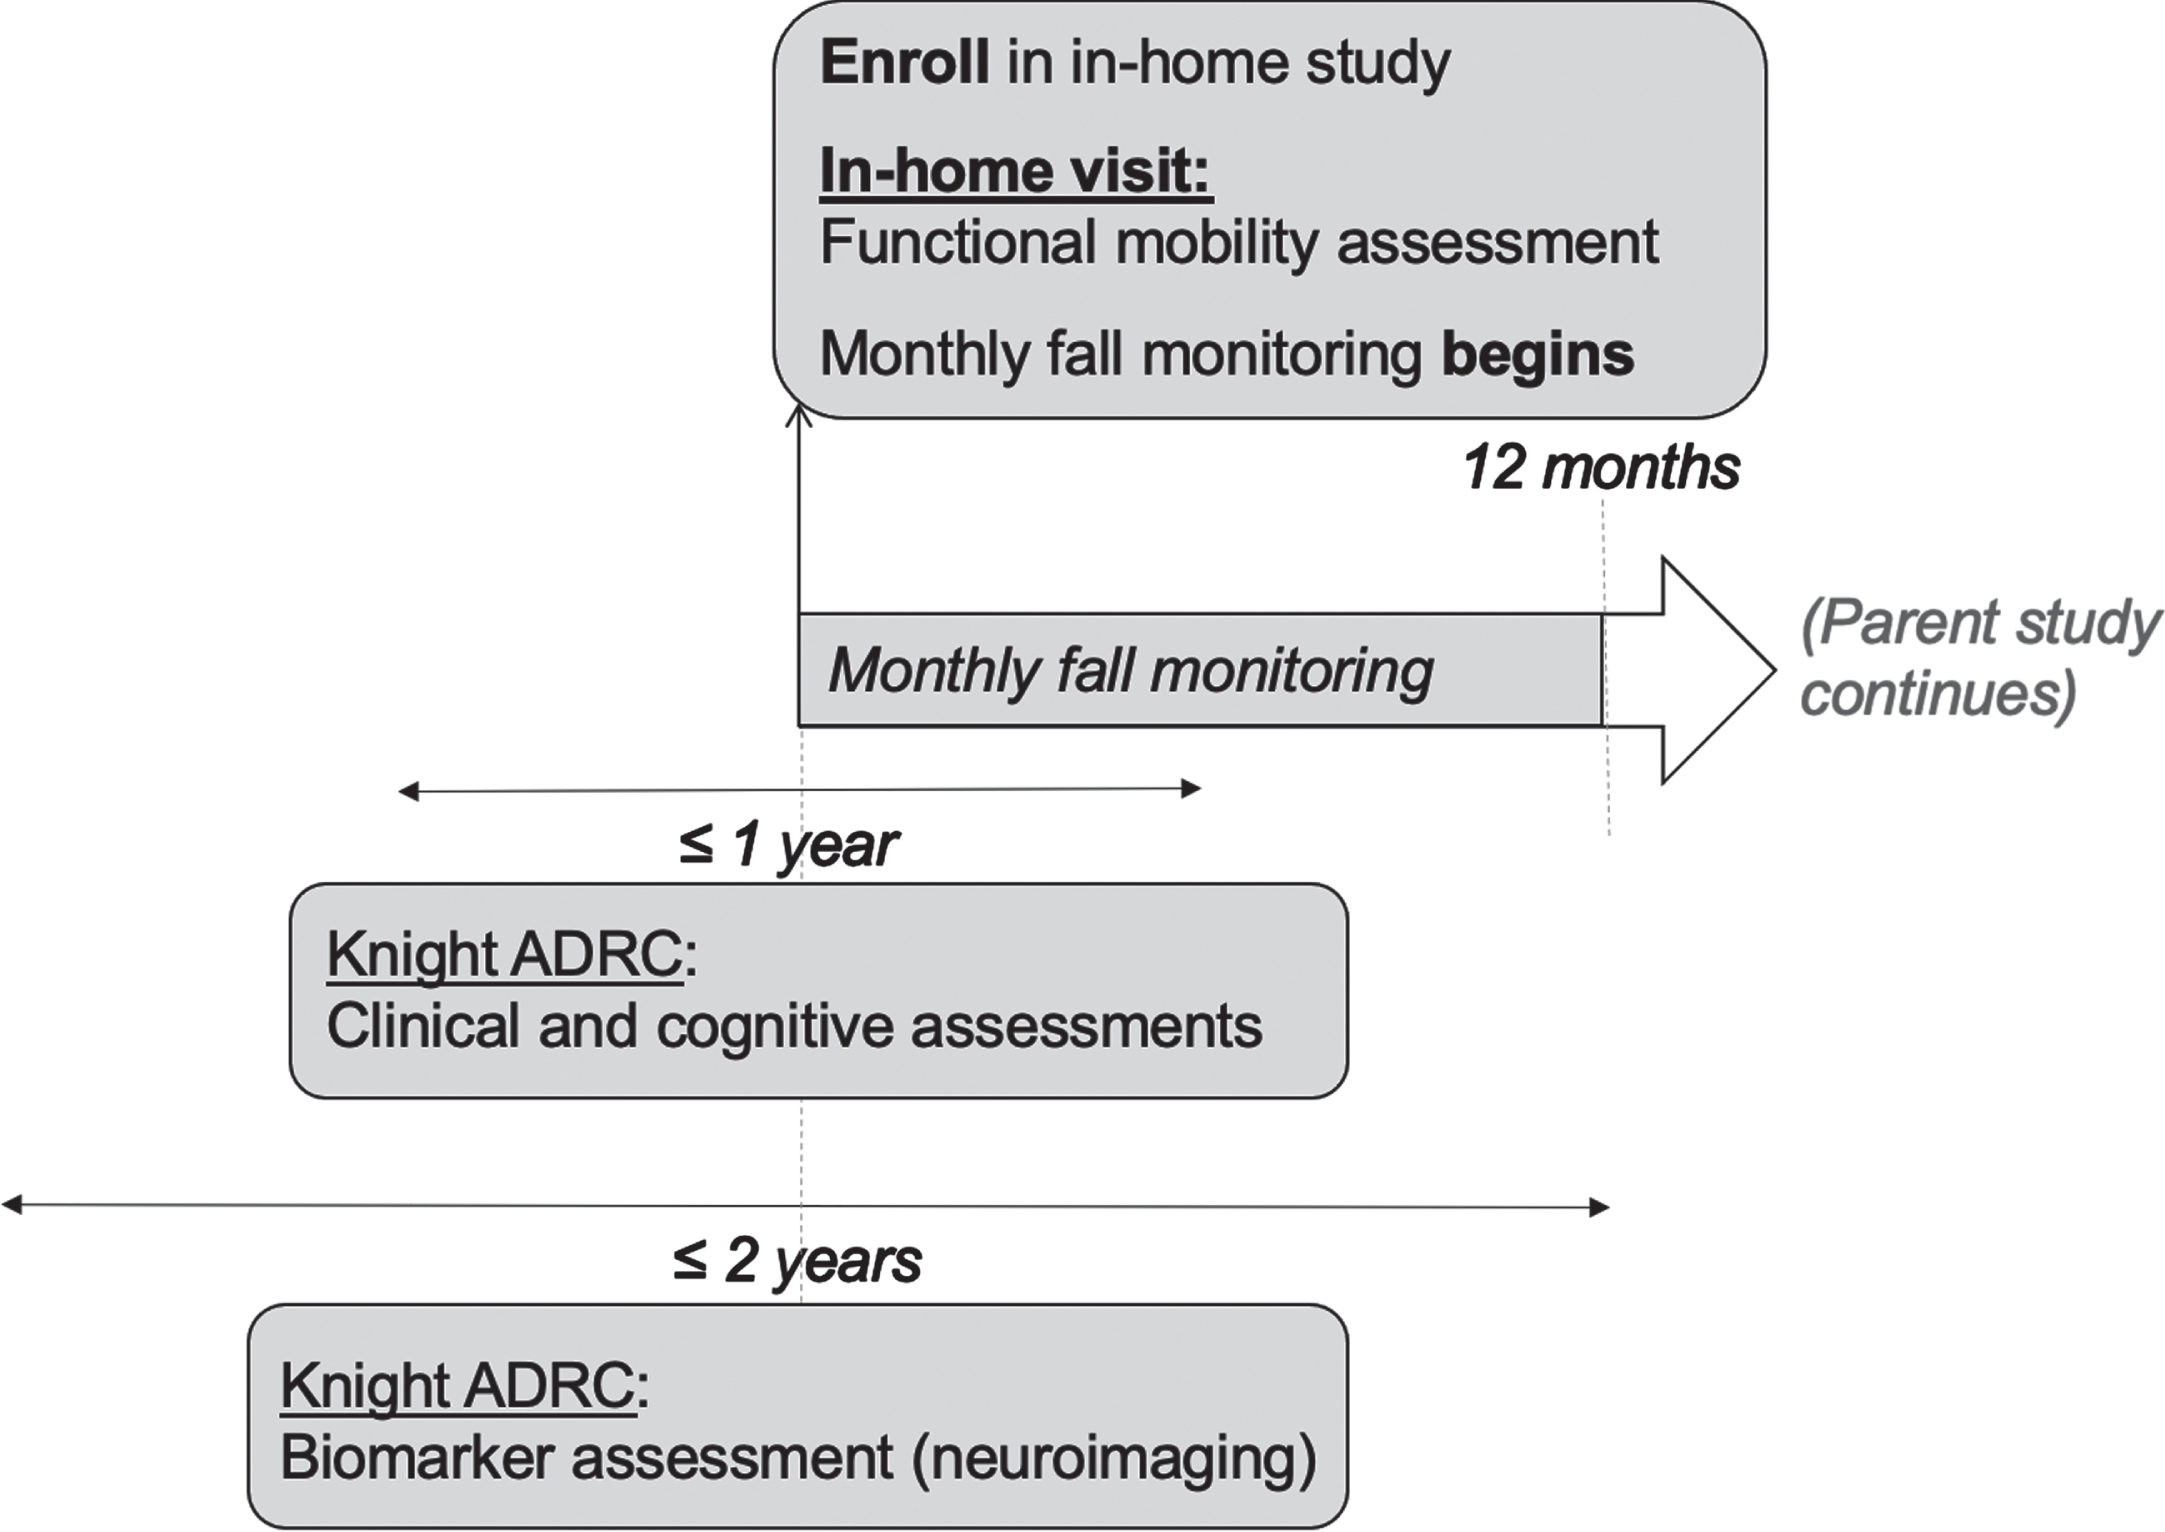 Timeline of study procedures. ADRC, Alzheimer’s Disease Research Center.